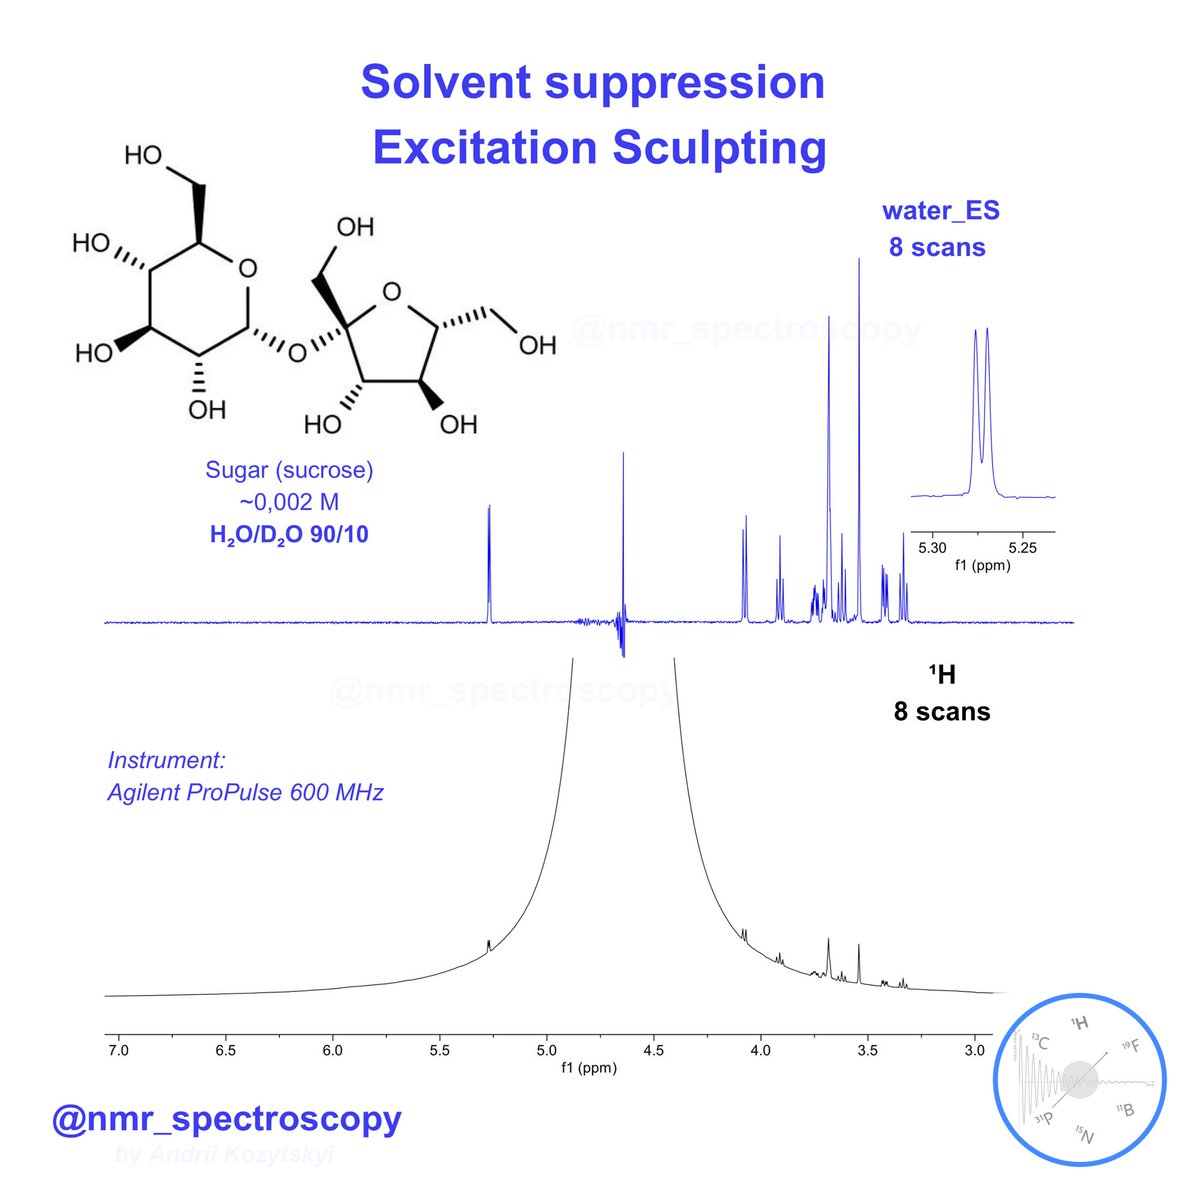 💧🧲 Part III of our water suppression series. Excitation Sculpting. Standard water_ES parameter set was used (OpenVNMRJ software). There are a lot of variants of ES e.g. in Bruker TopSpin pulse sequences library. #nmr #nmrchat #chemistry #organicchemistry #spectroscopy